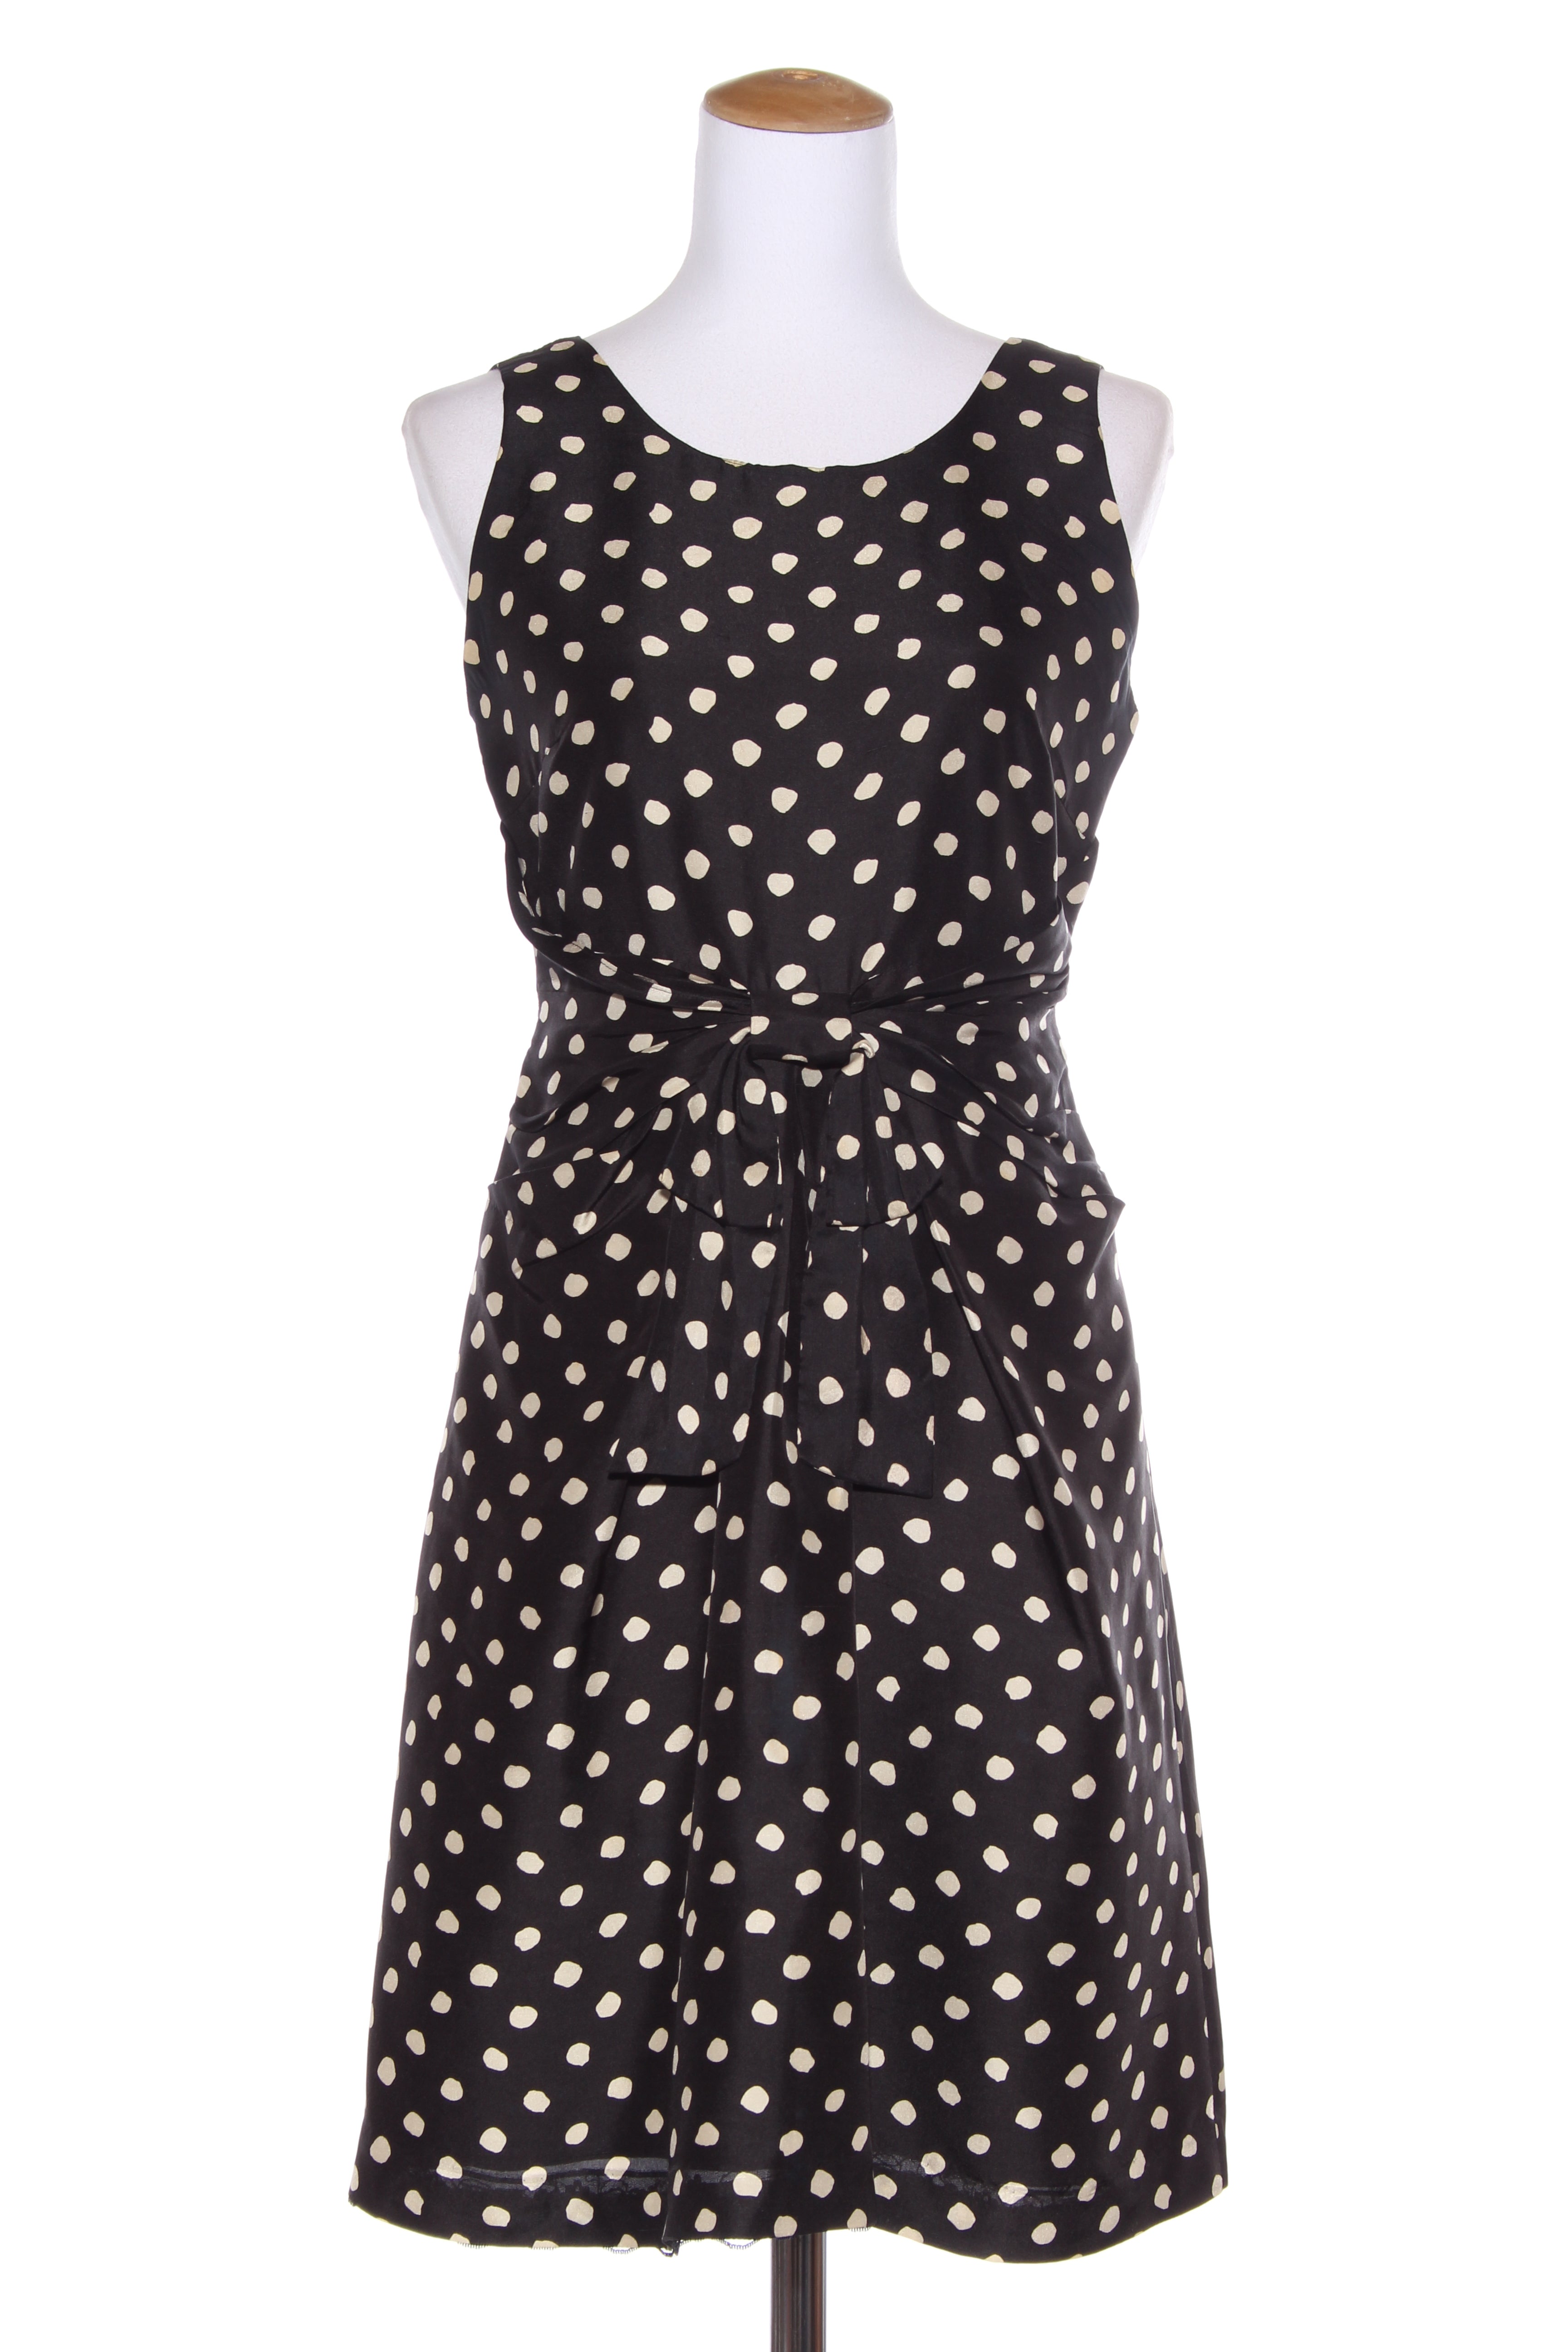 KATE SPADE - Spotty silk bow detail dress! 10 | Recycle Style | Preloved  Designer Clothing